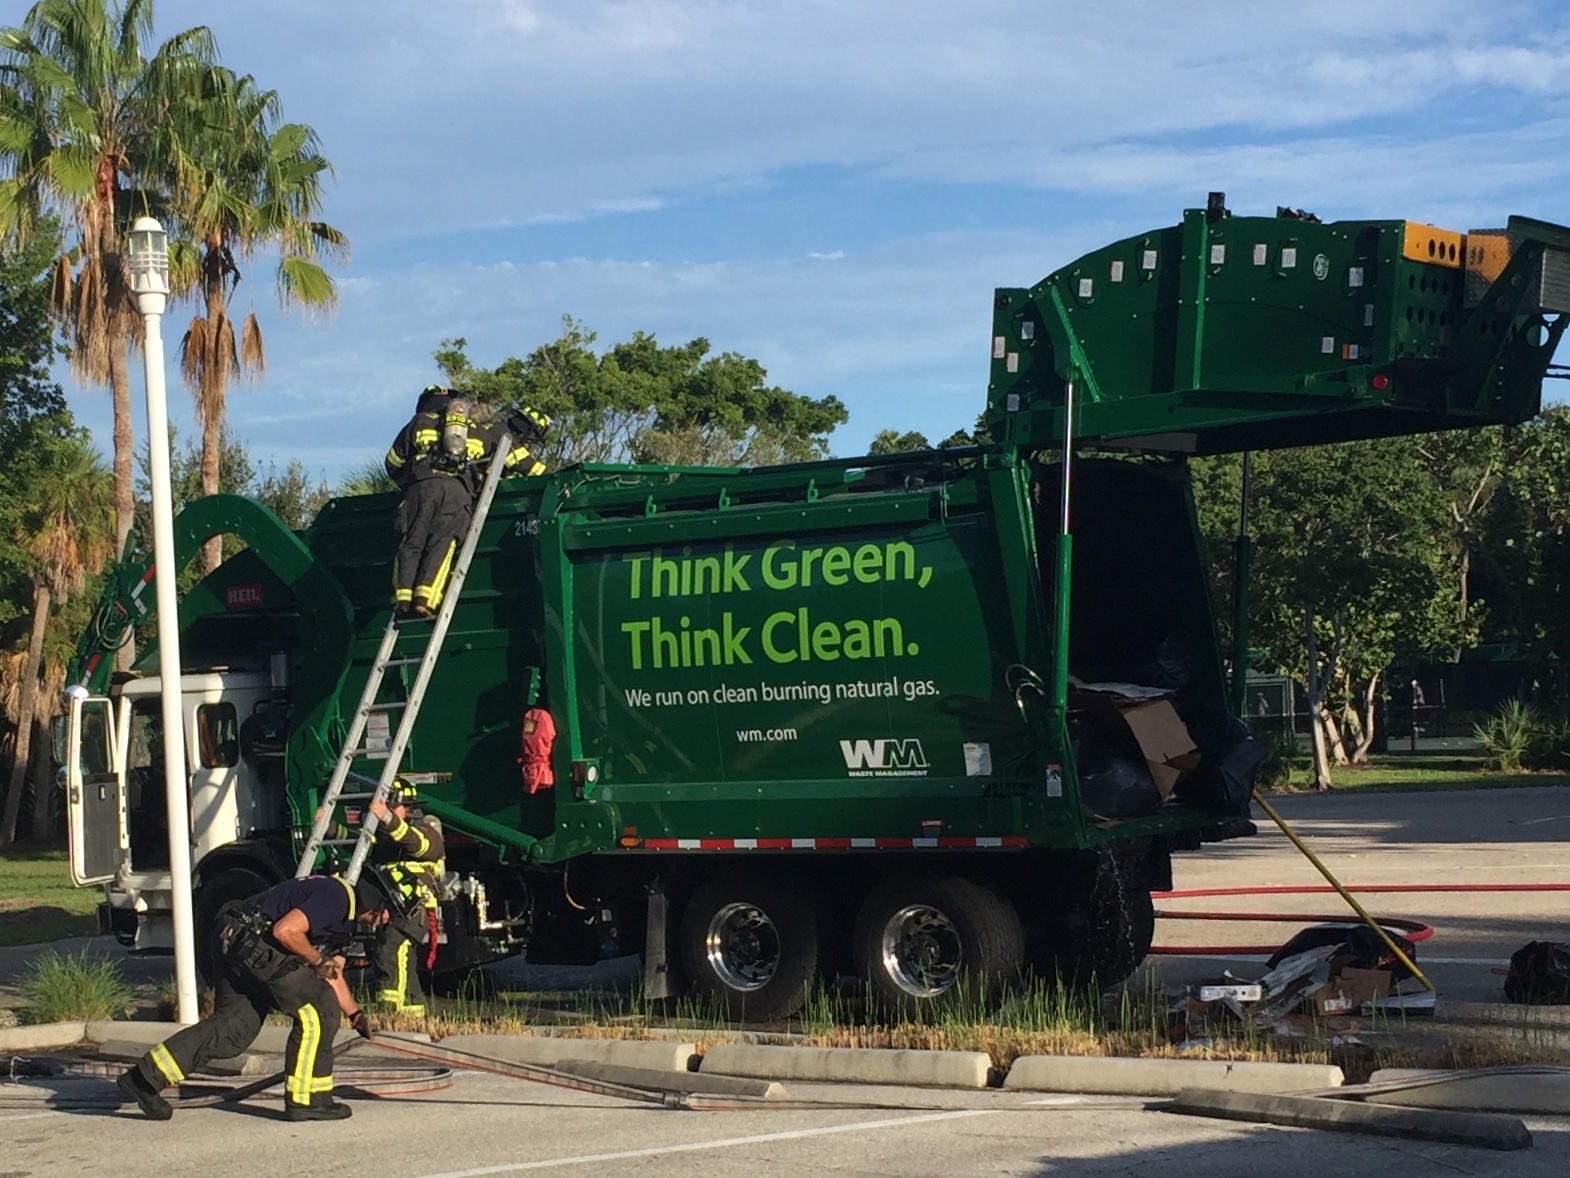 Firefighters used ladders to access the hopper of the Waste Management truck.